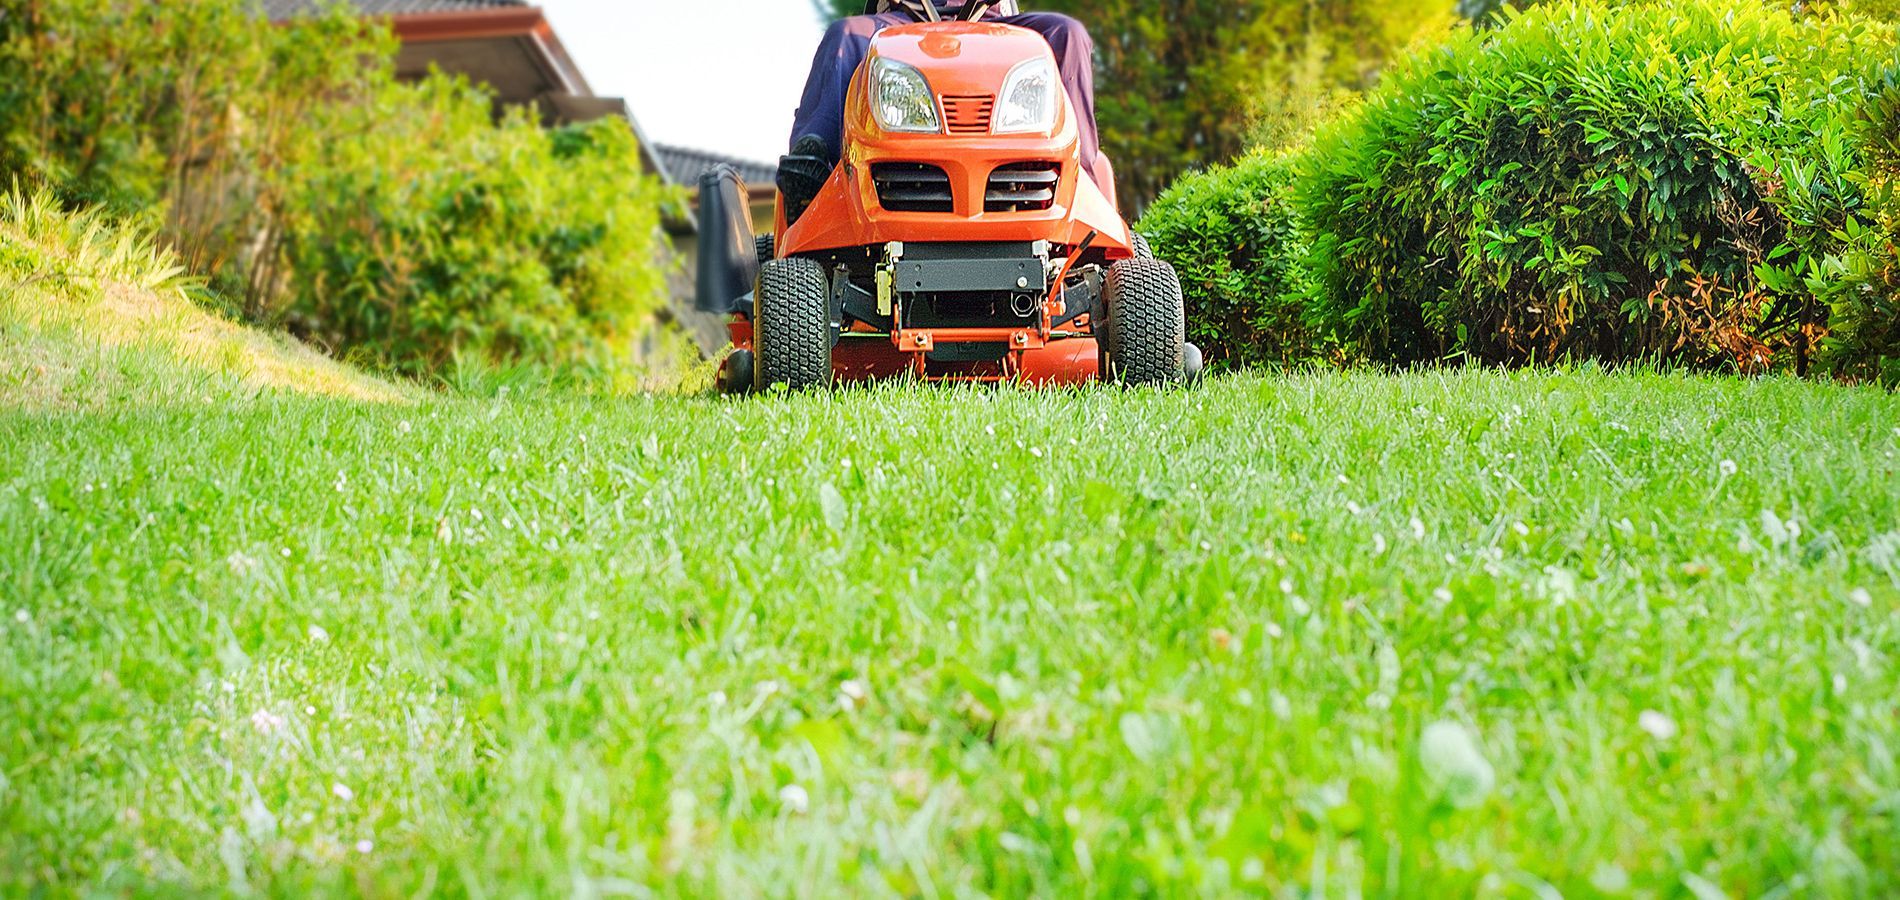 Weekly Lawn Care and Maintenance Services in Crystal Lake, IL and Barrington, IL